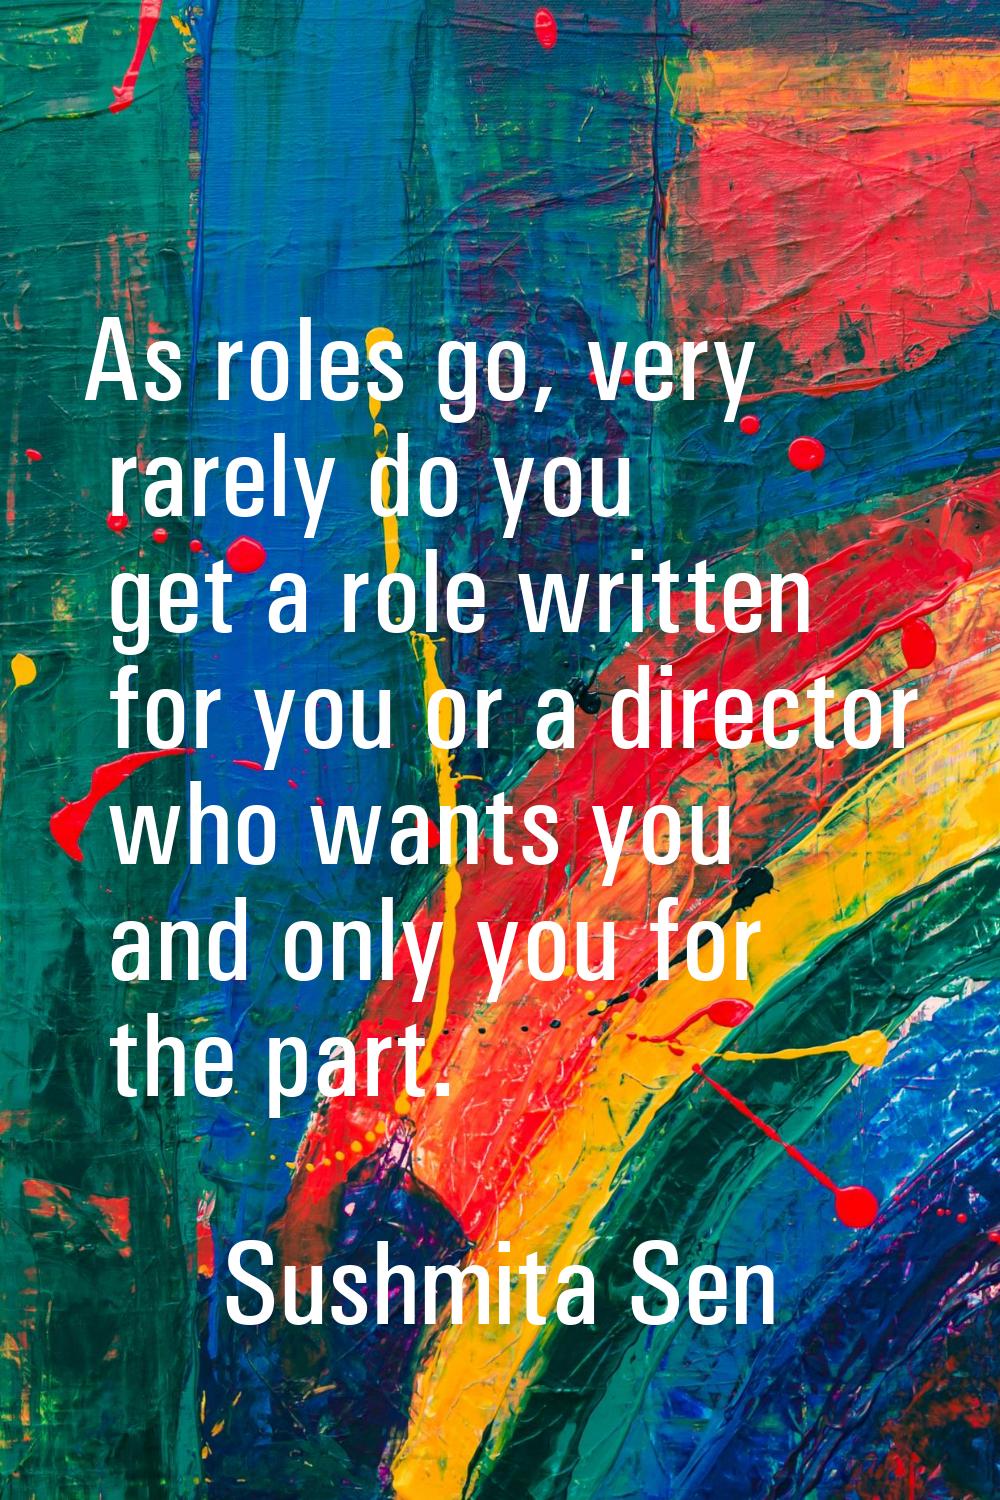 As roles go, very rarely do you get a role written for you or a director who wants you and only you